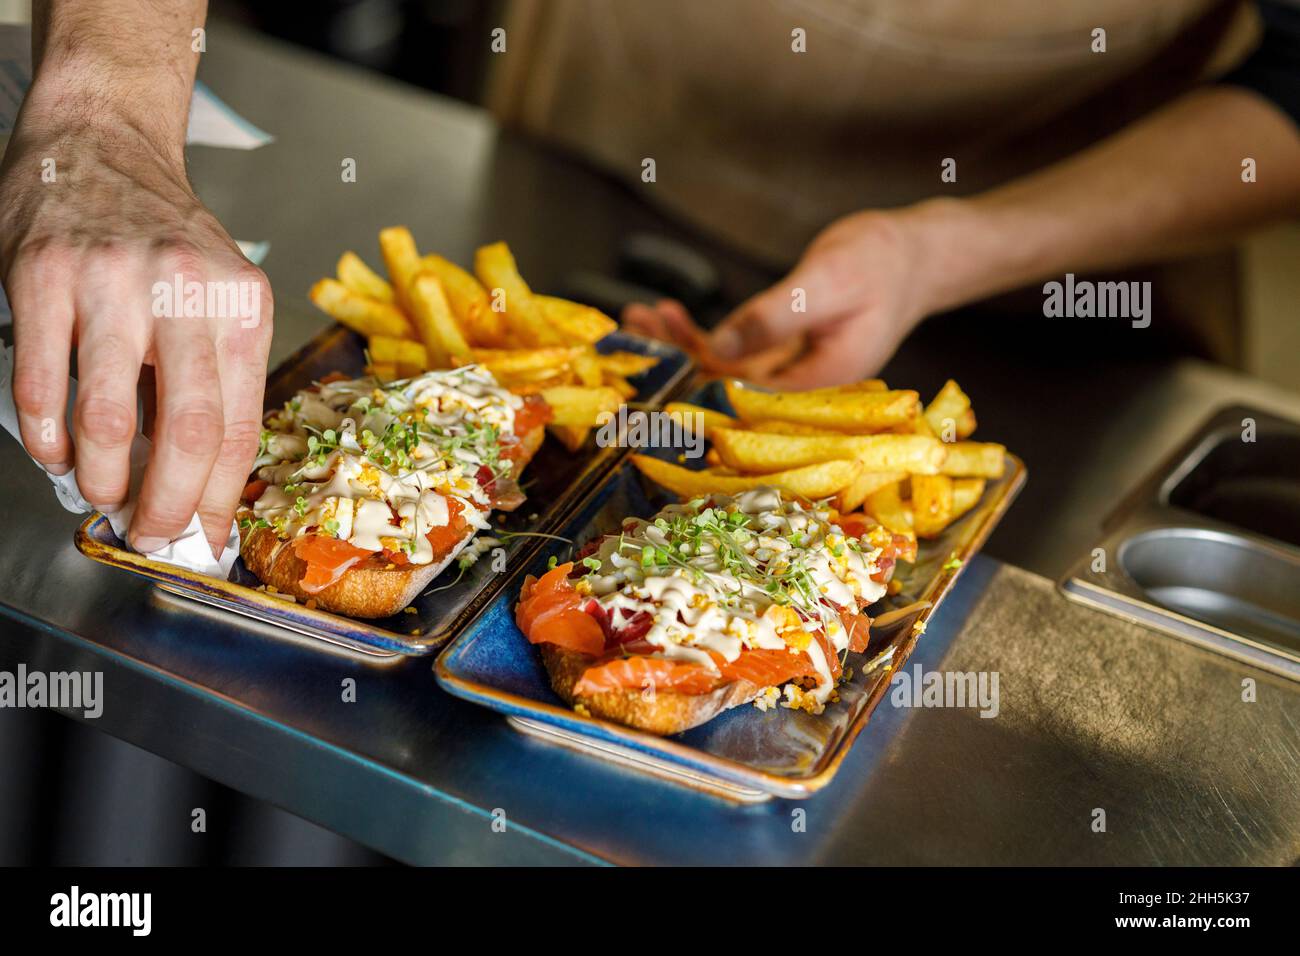 Chef cleaning serving dish at restaurant counter Stock Photo